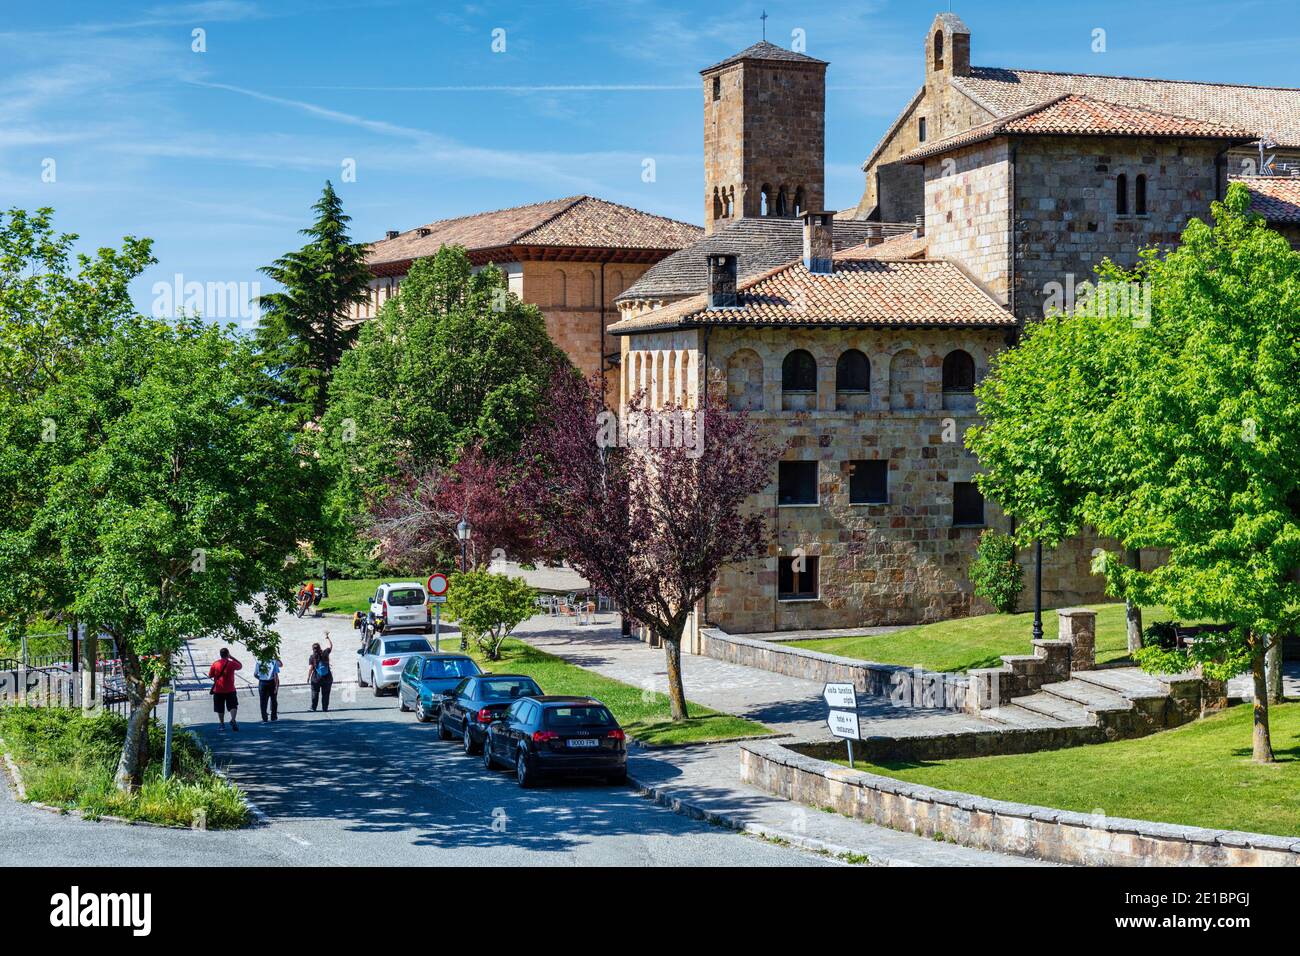 The Monastery of San Salvador of Leyre, Navarre, Spain. Stock Photo